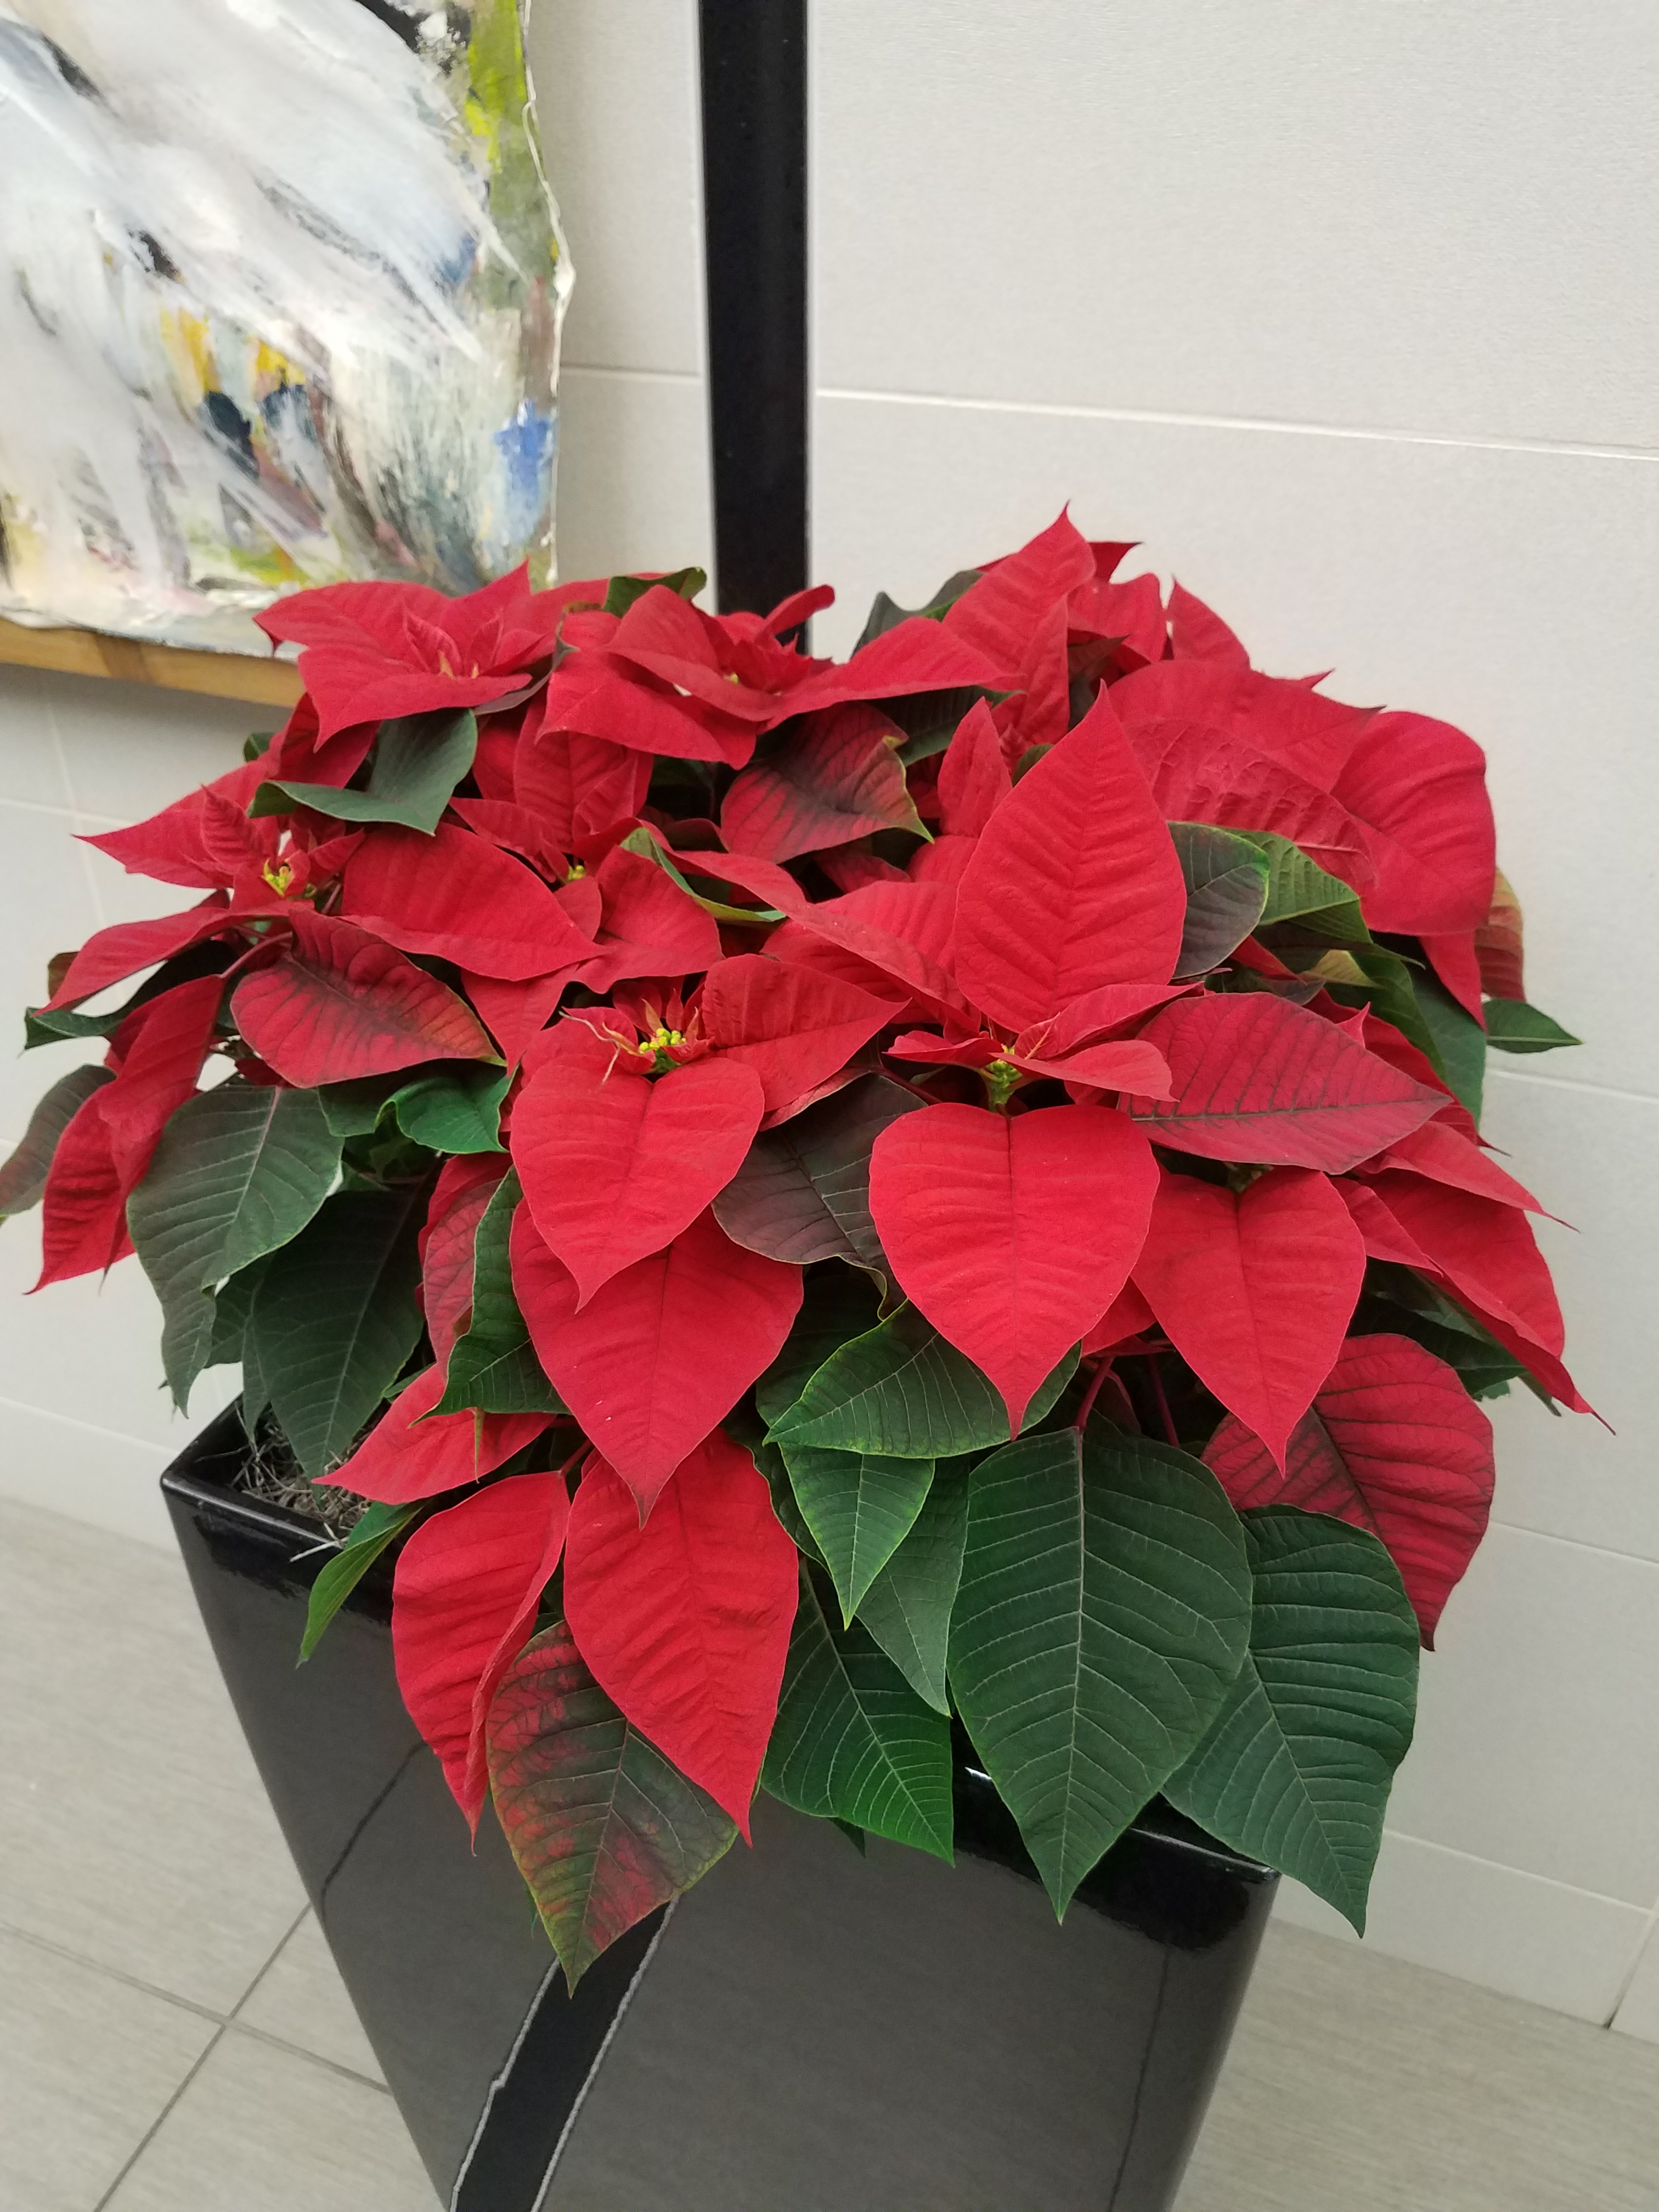 Growing And Caring For Poinsettia Umn Extension,When Are Strawberries In Season